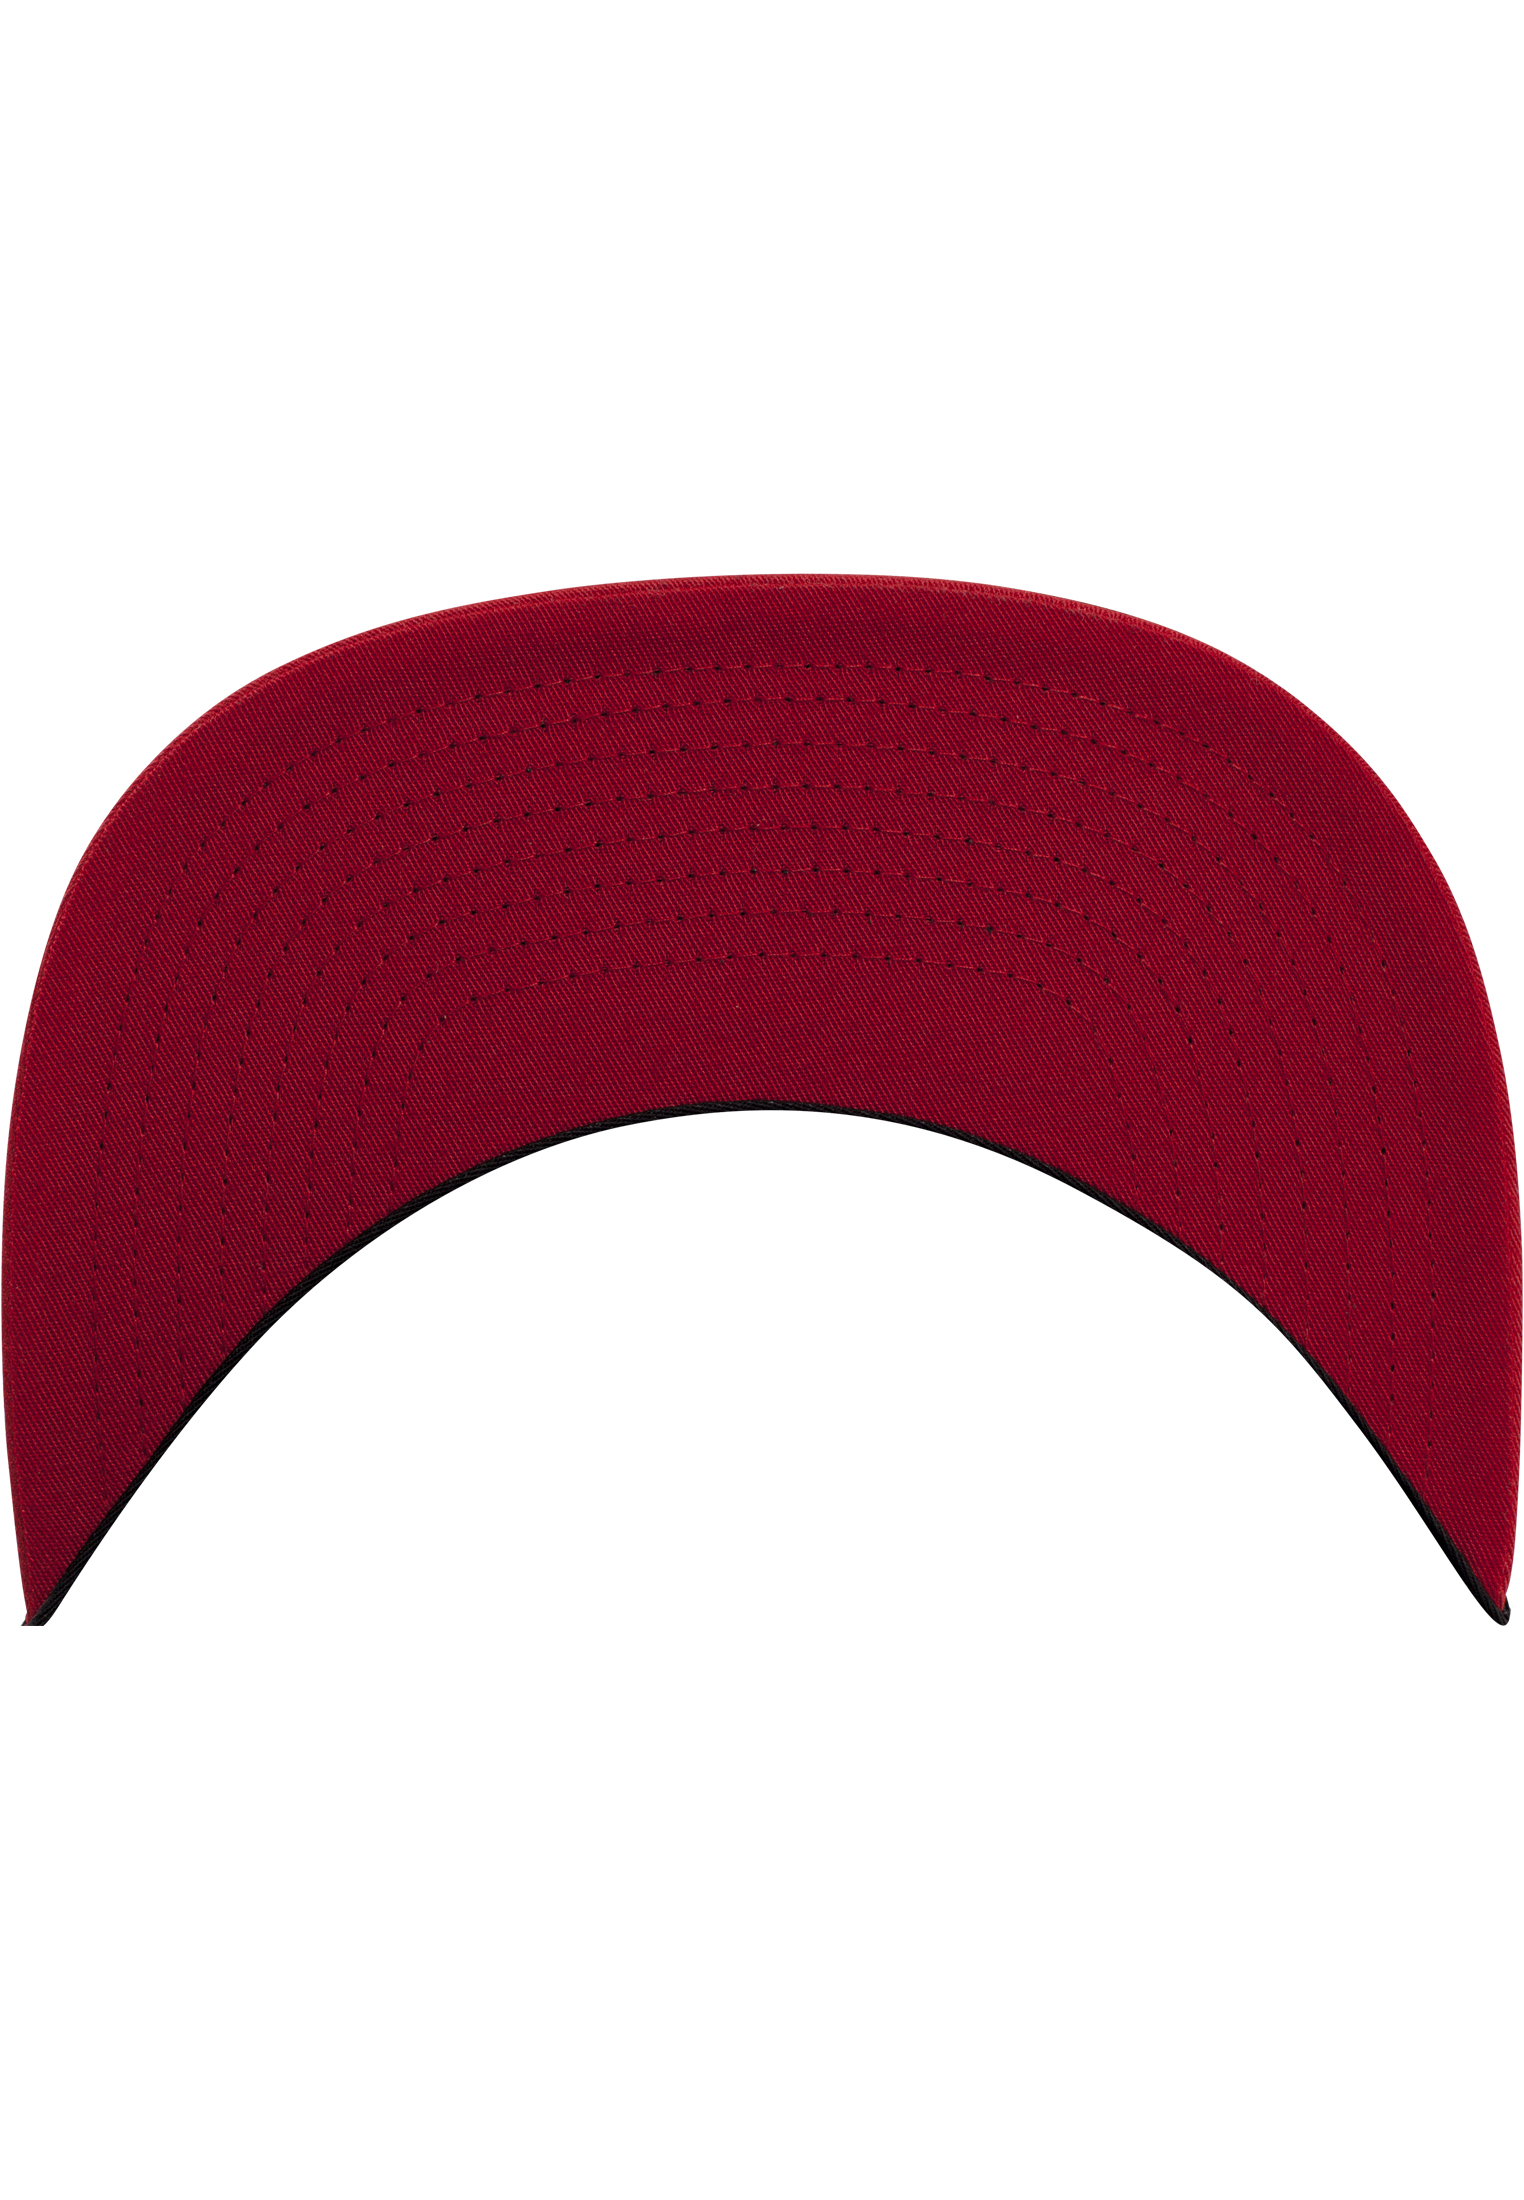 Trucker Foam Trucker with White Front in Farbe red/wht/blk